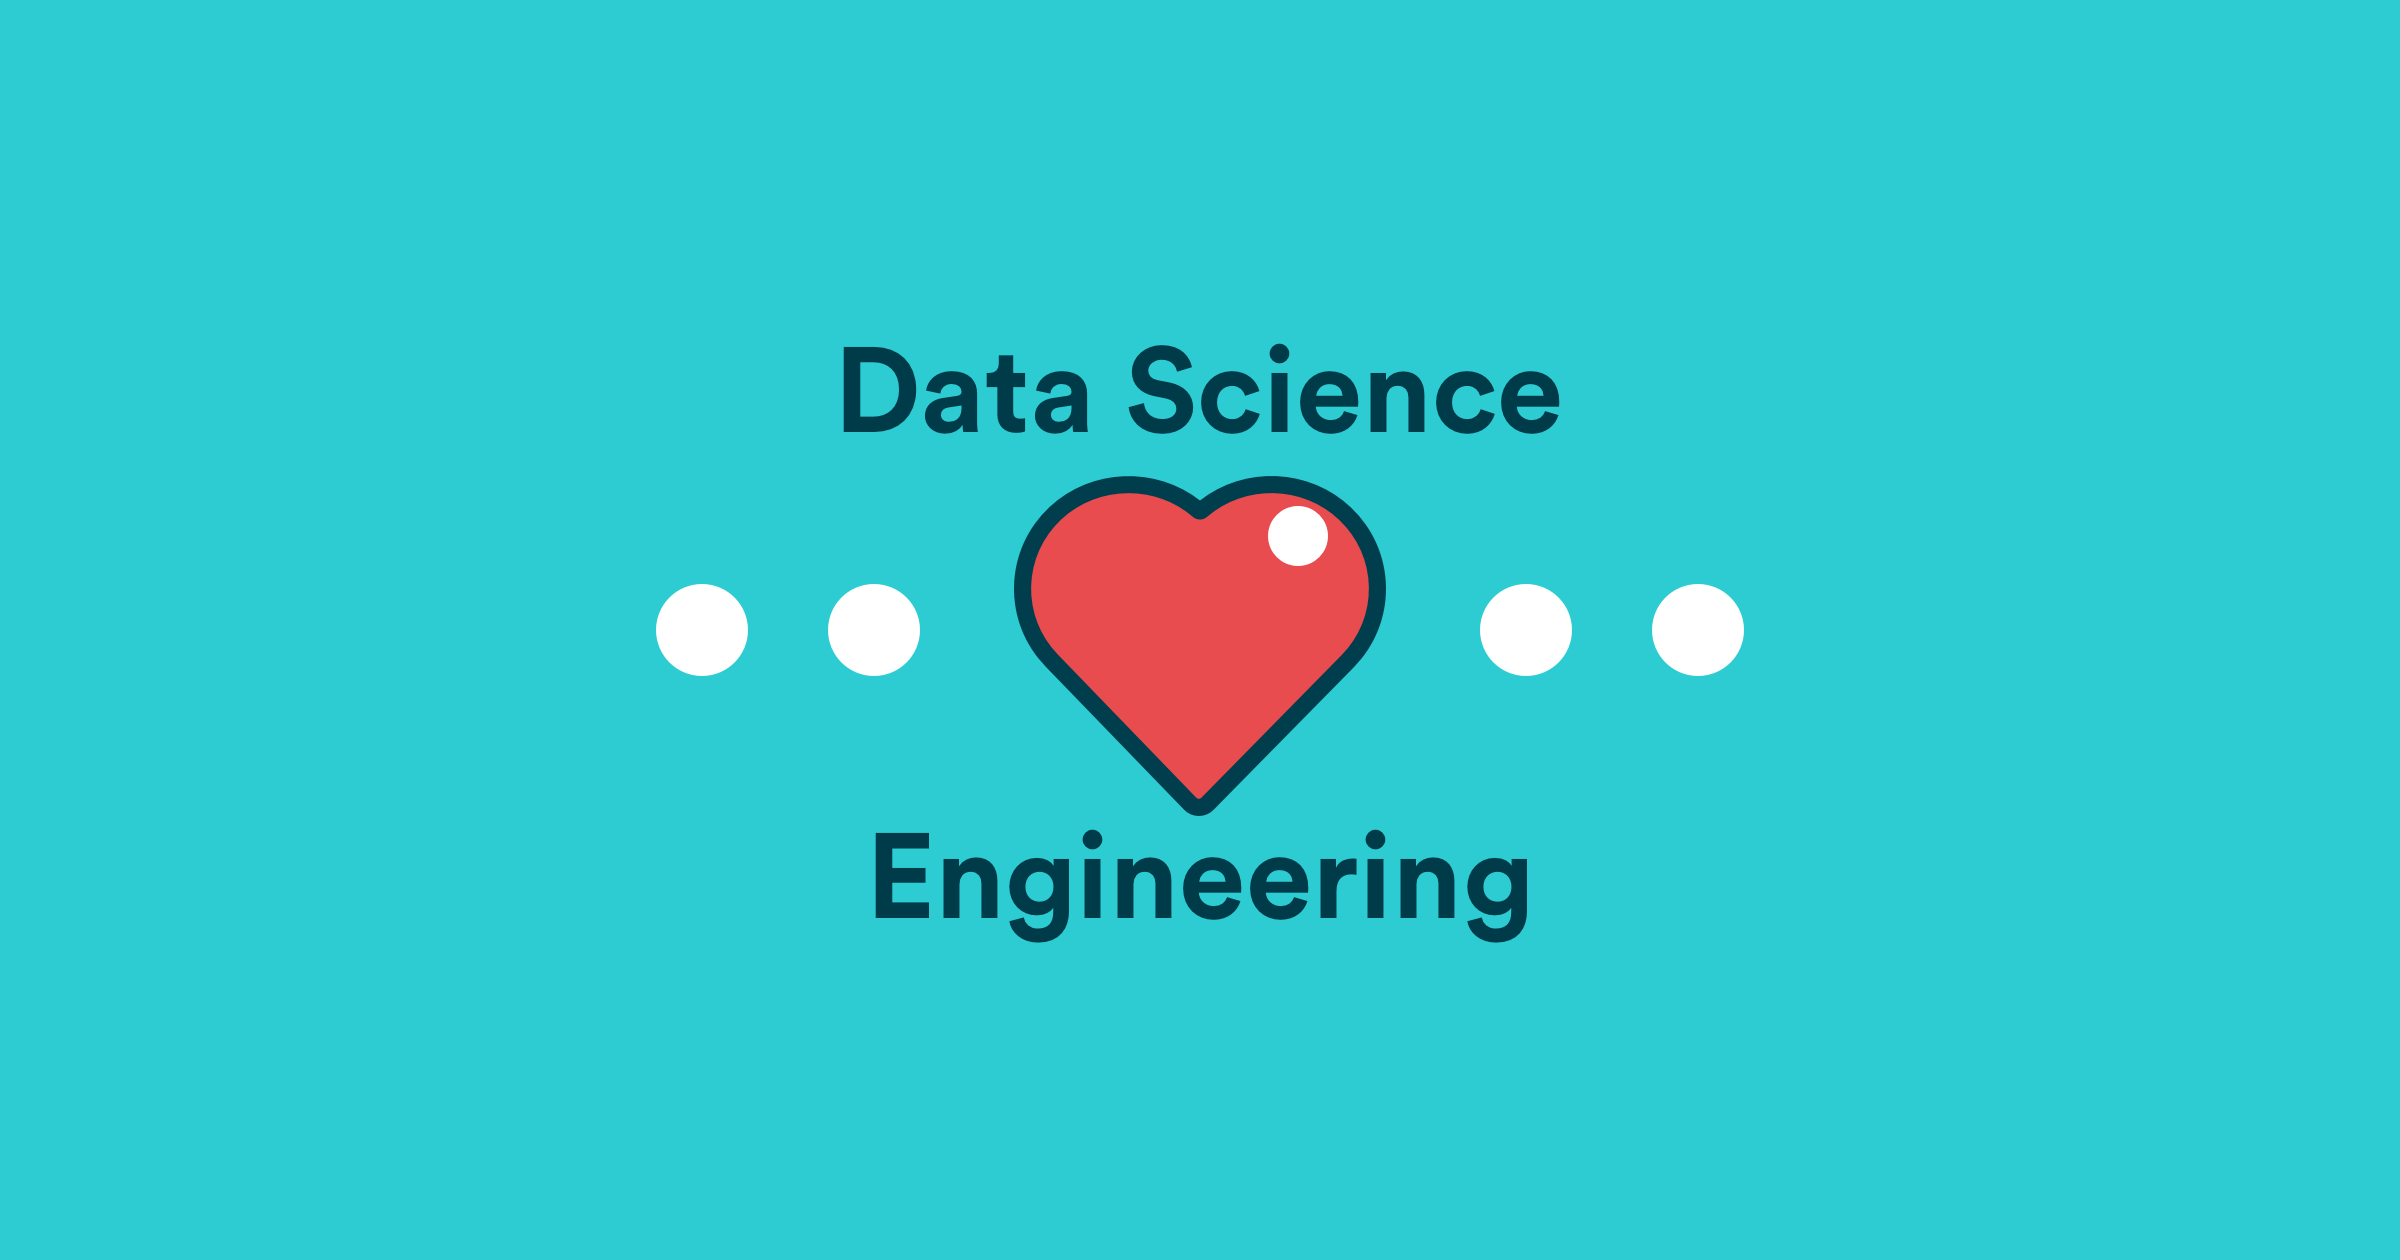 From Notebook to Production: How to Bridge the Gap between Data Science and Engineering?